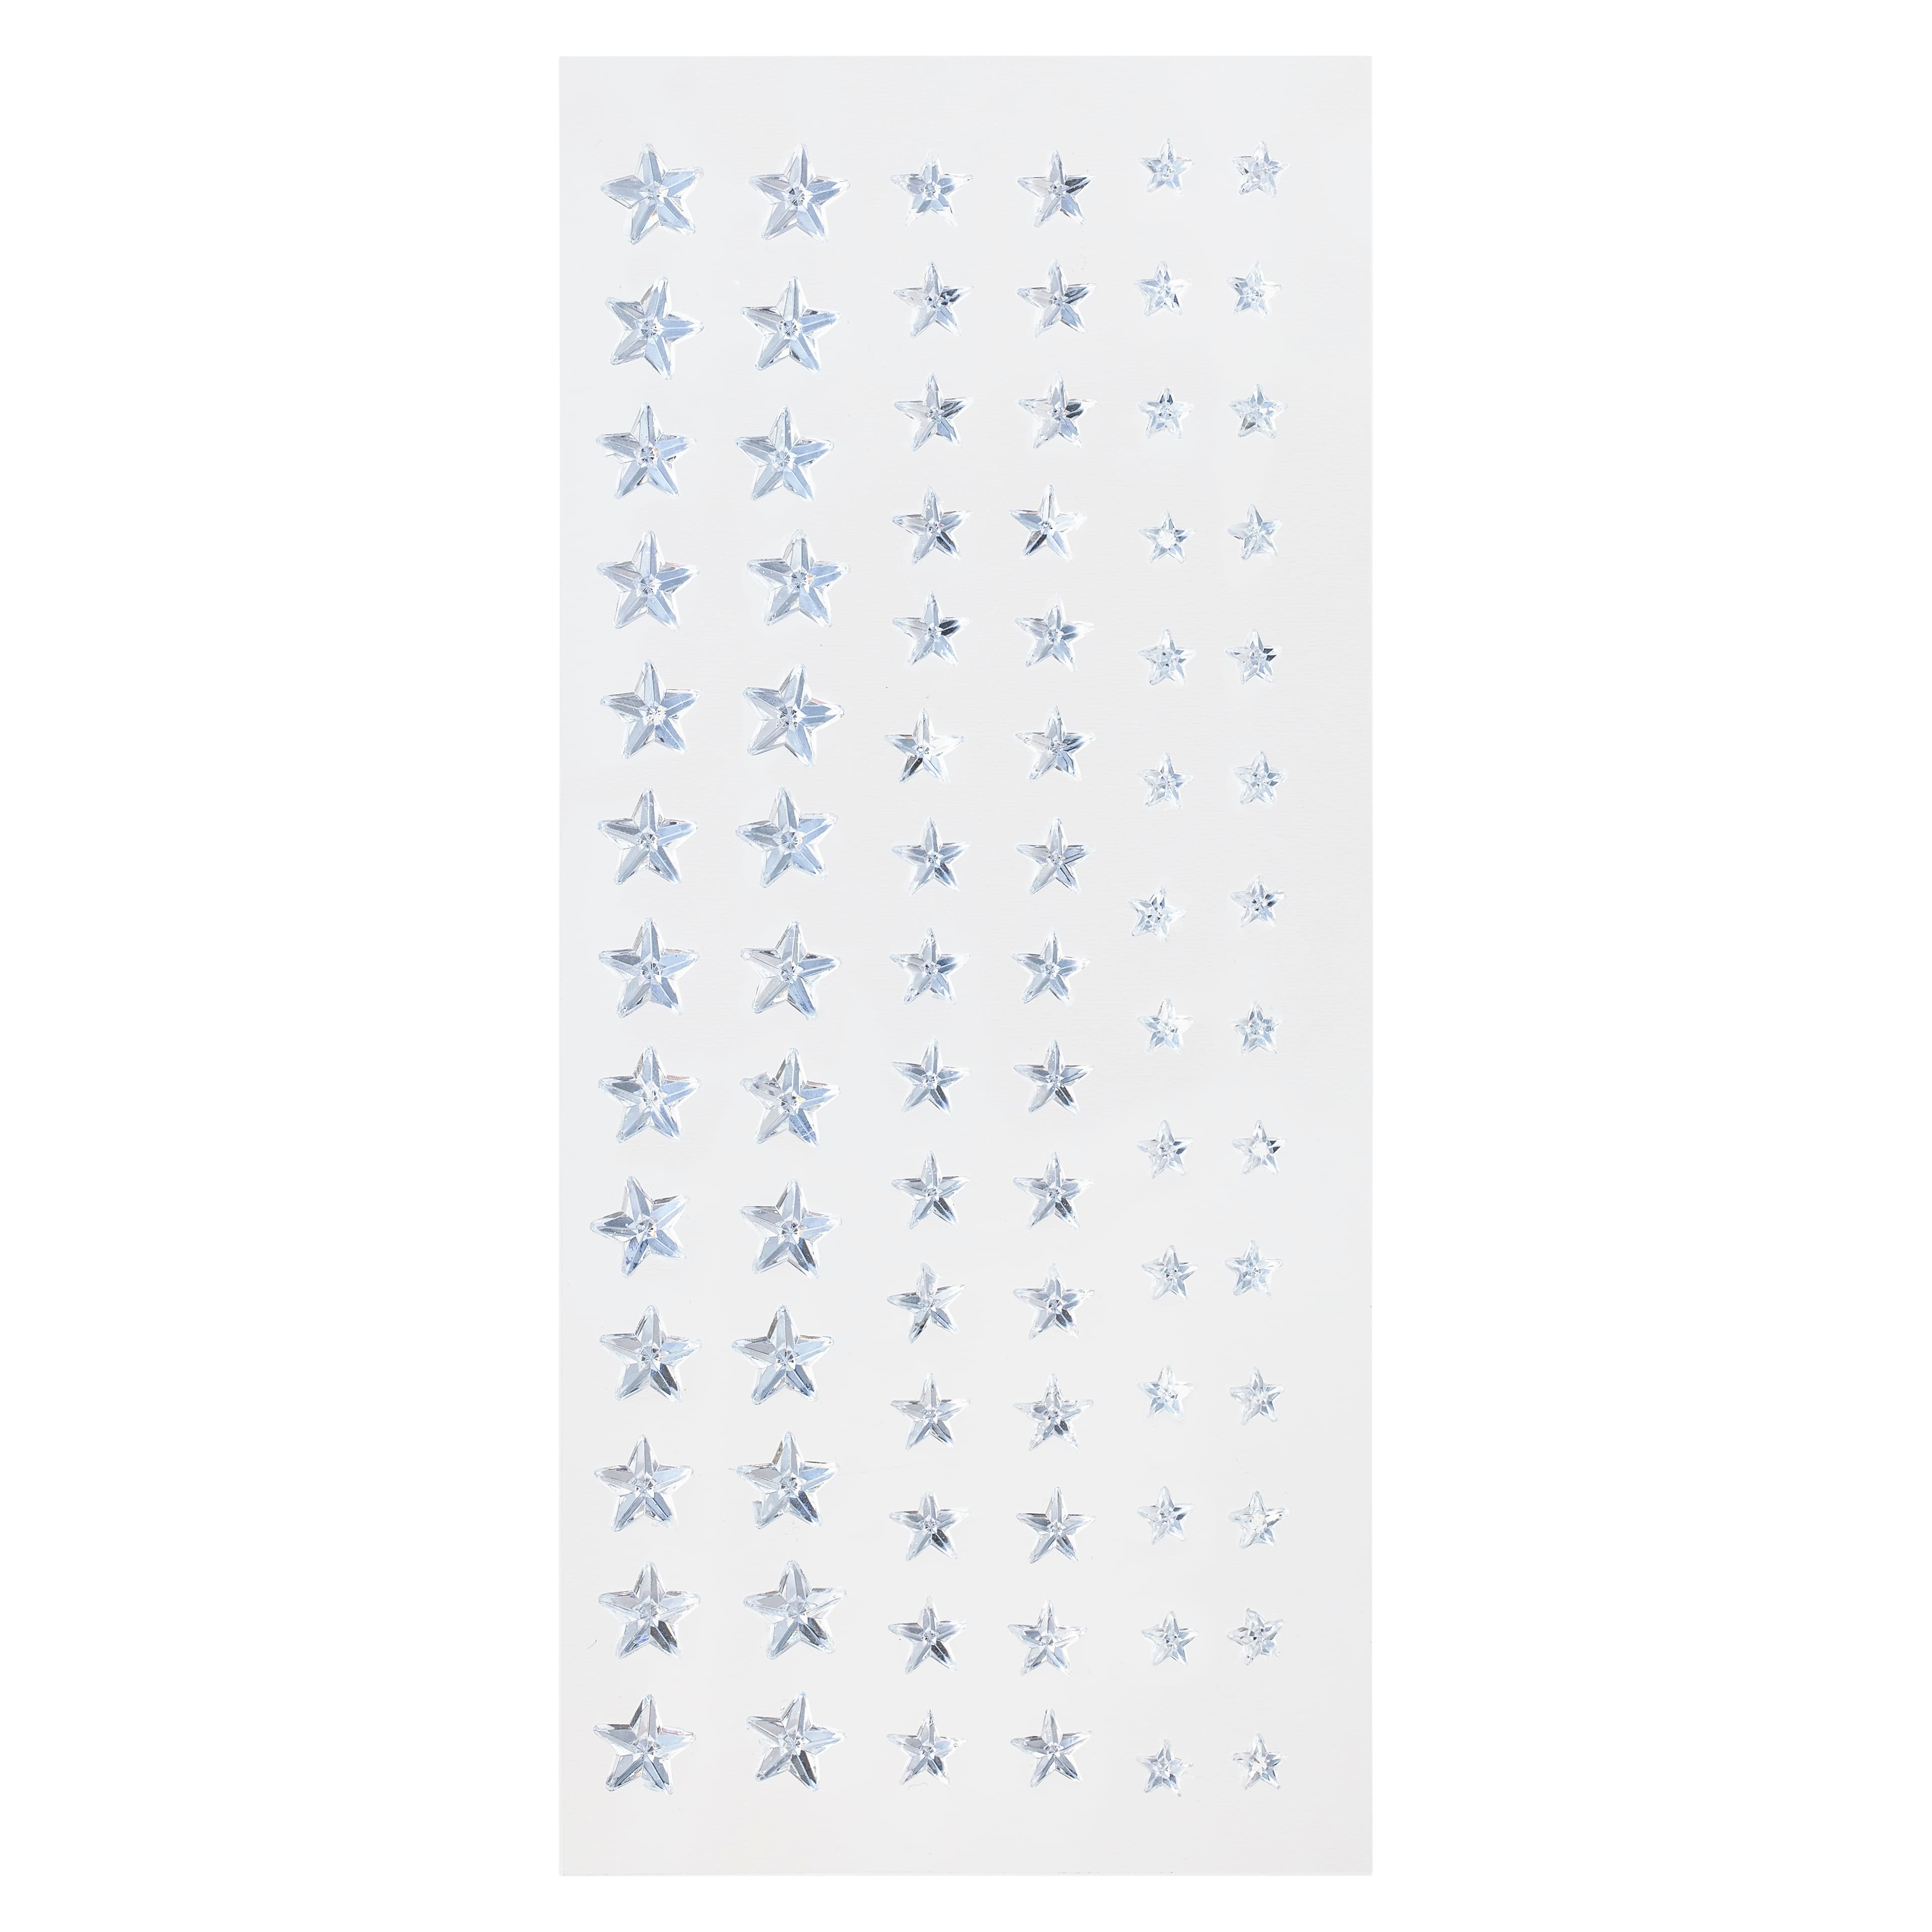 Gold Glitter Star Stickers by Recollections™, Michaels